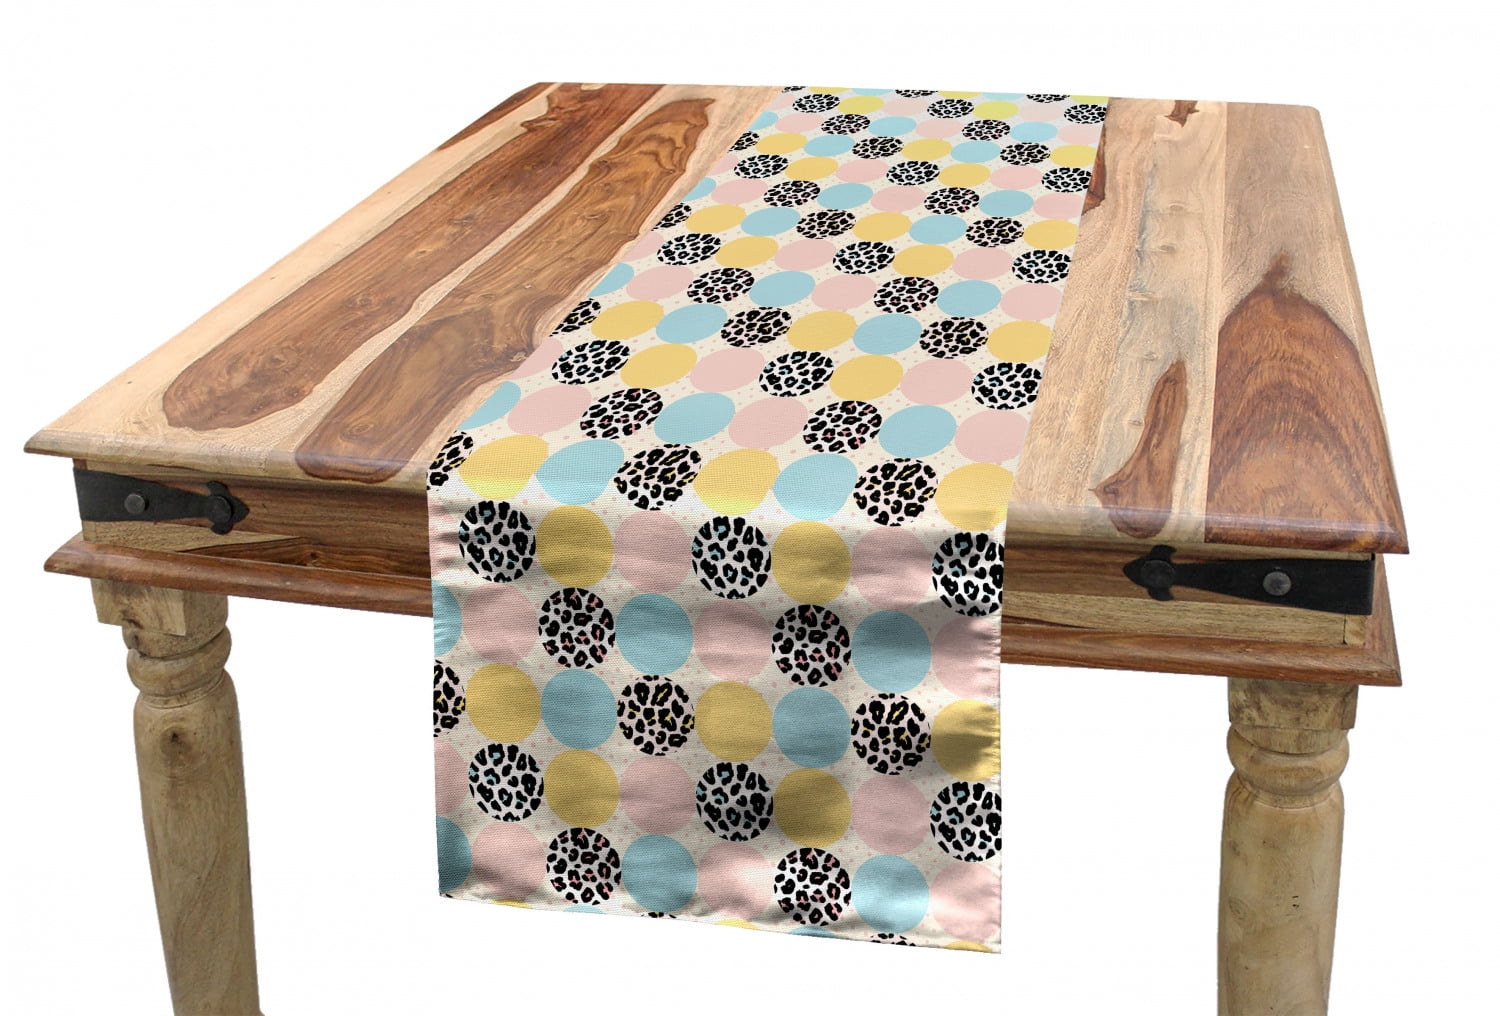 Modern Table Runner, Round Circles Ornamented with Animal Skin Print